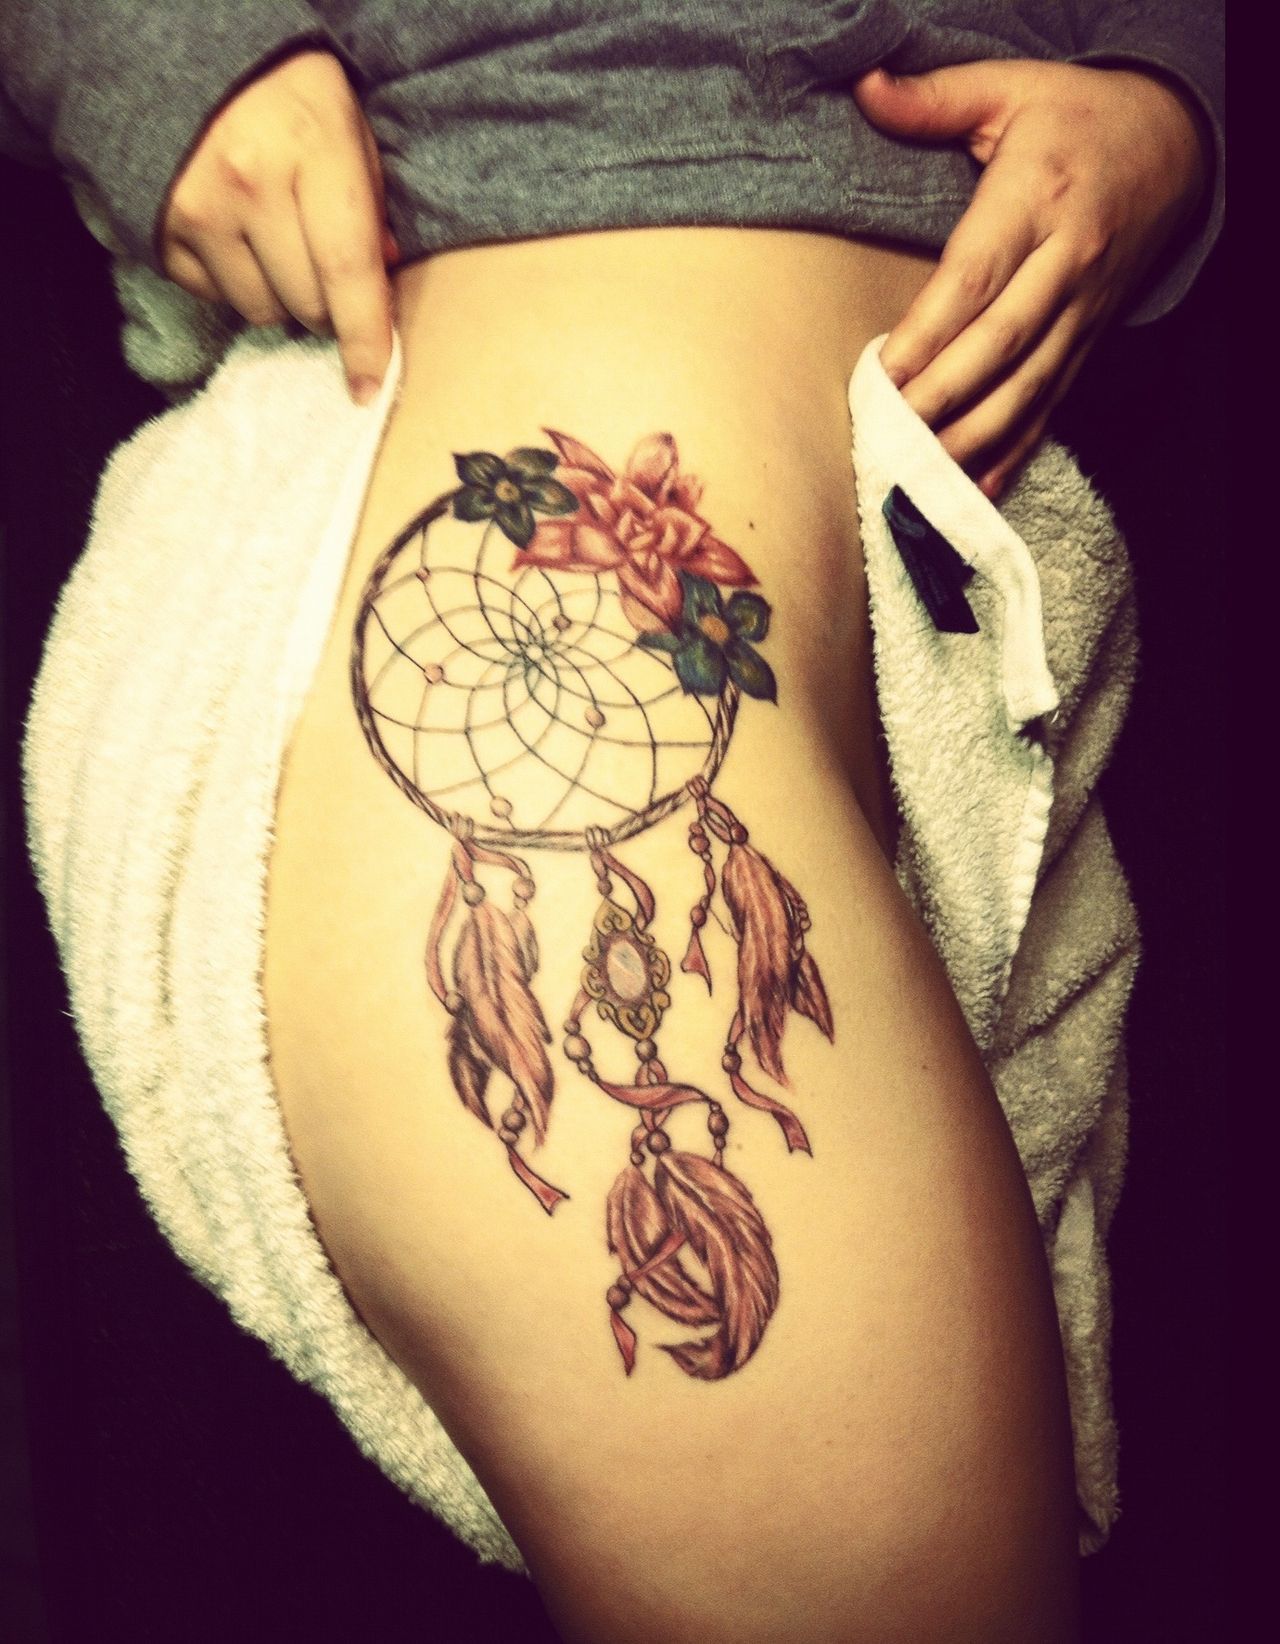 Placement!! This is where I want my hip/thigh tattoo!